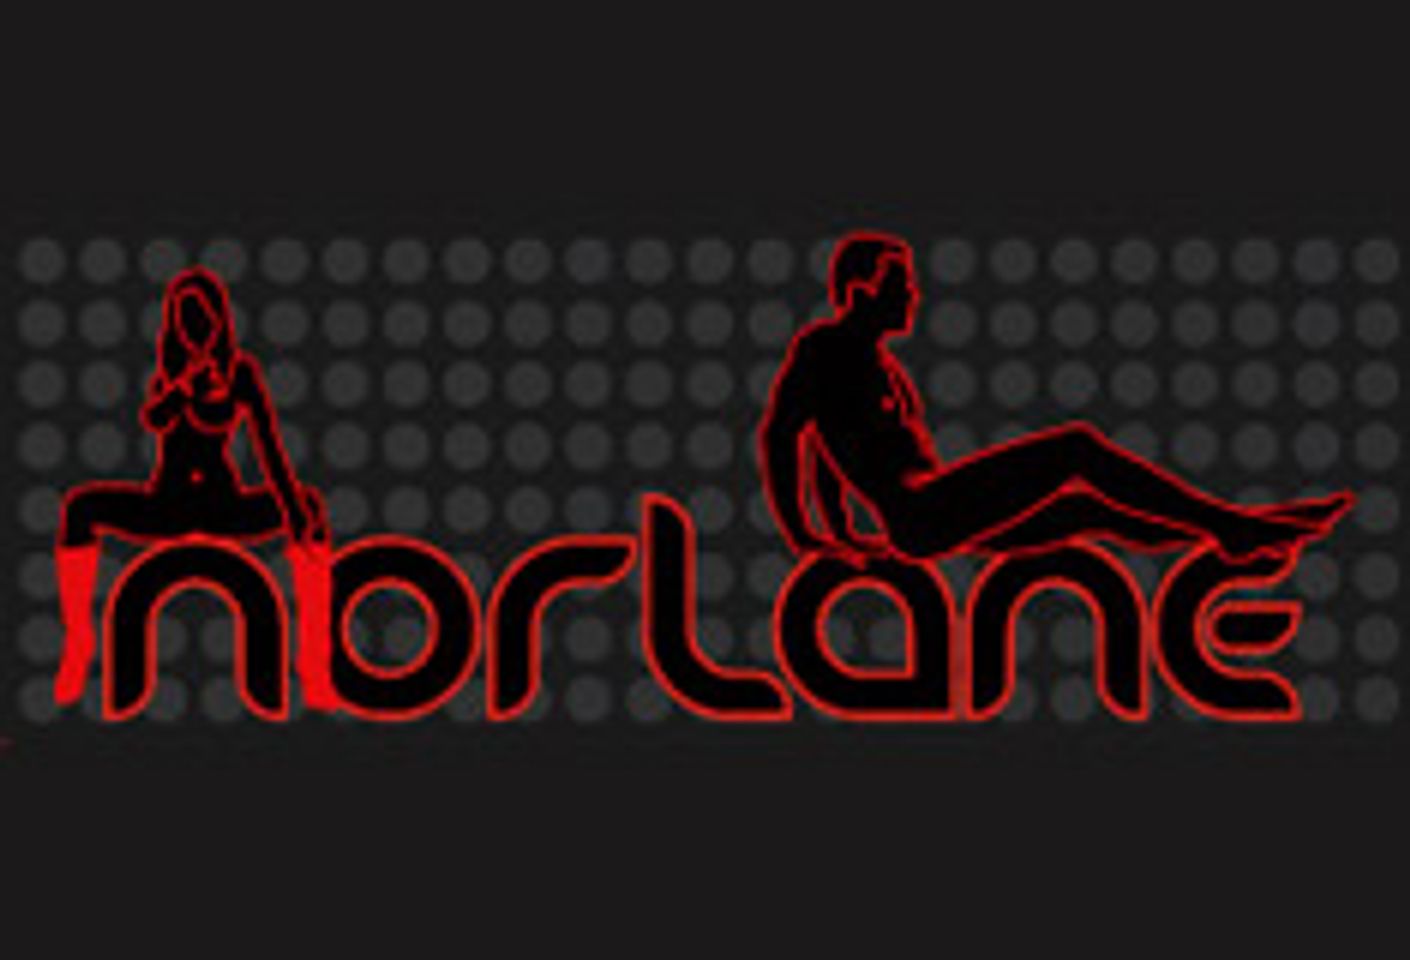 Norlane Launches Mobile Platform in North America